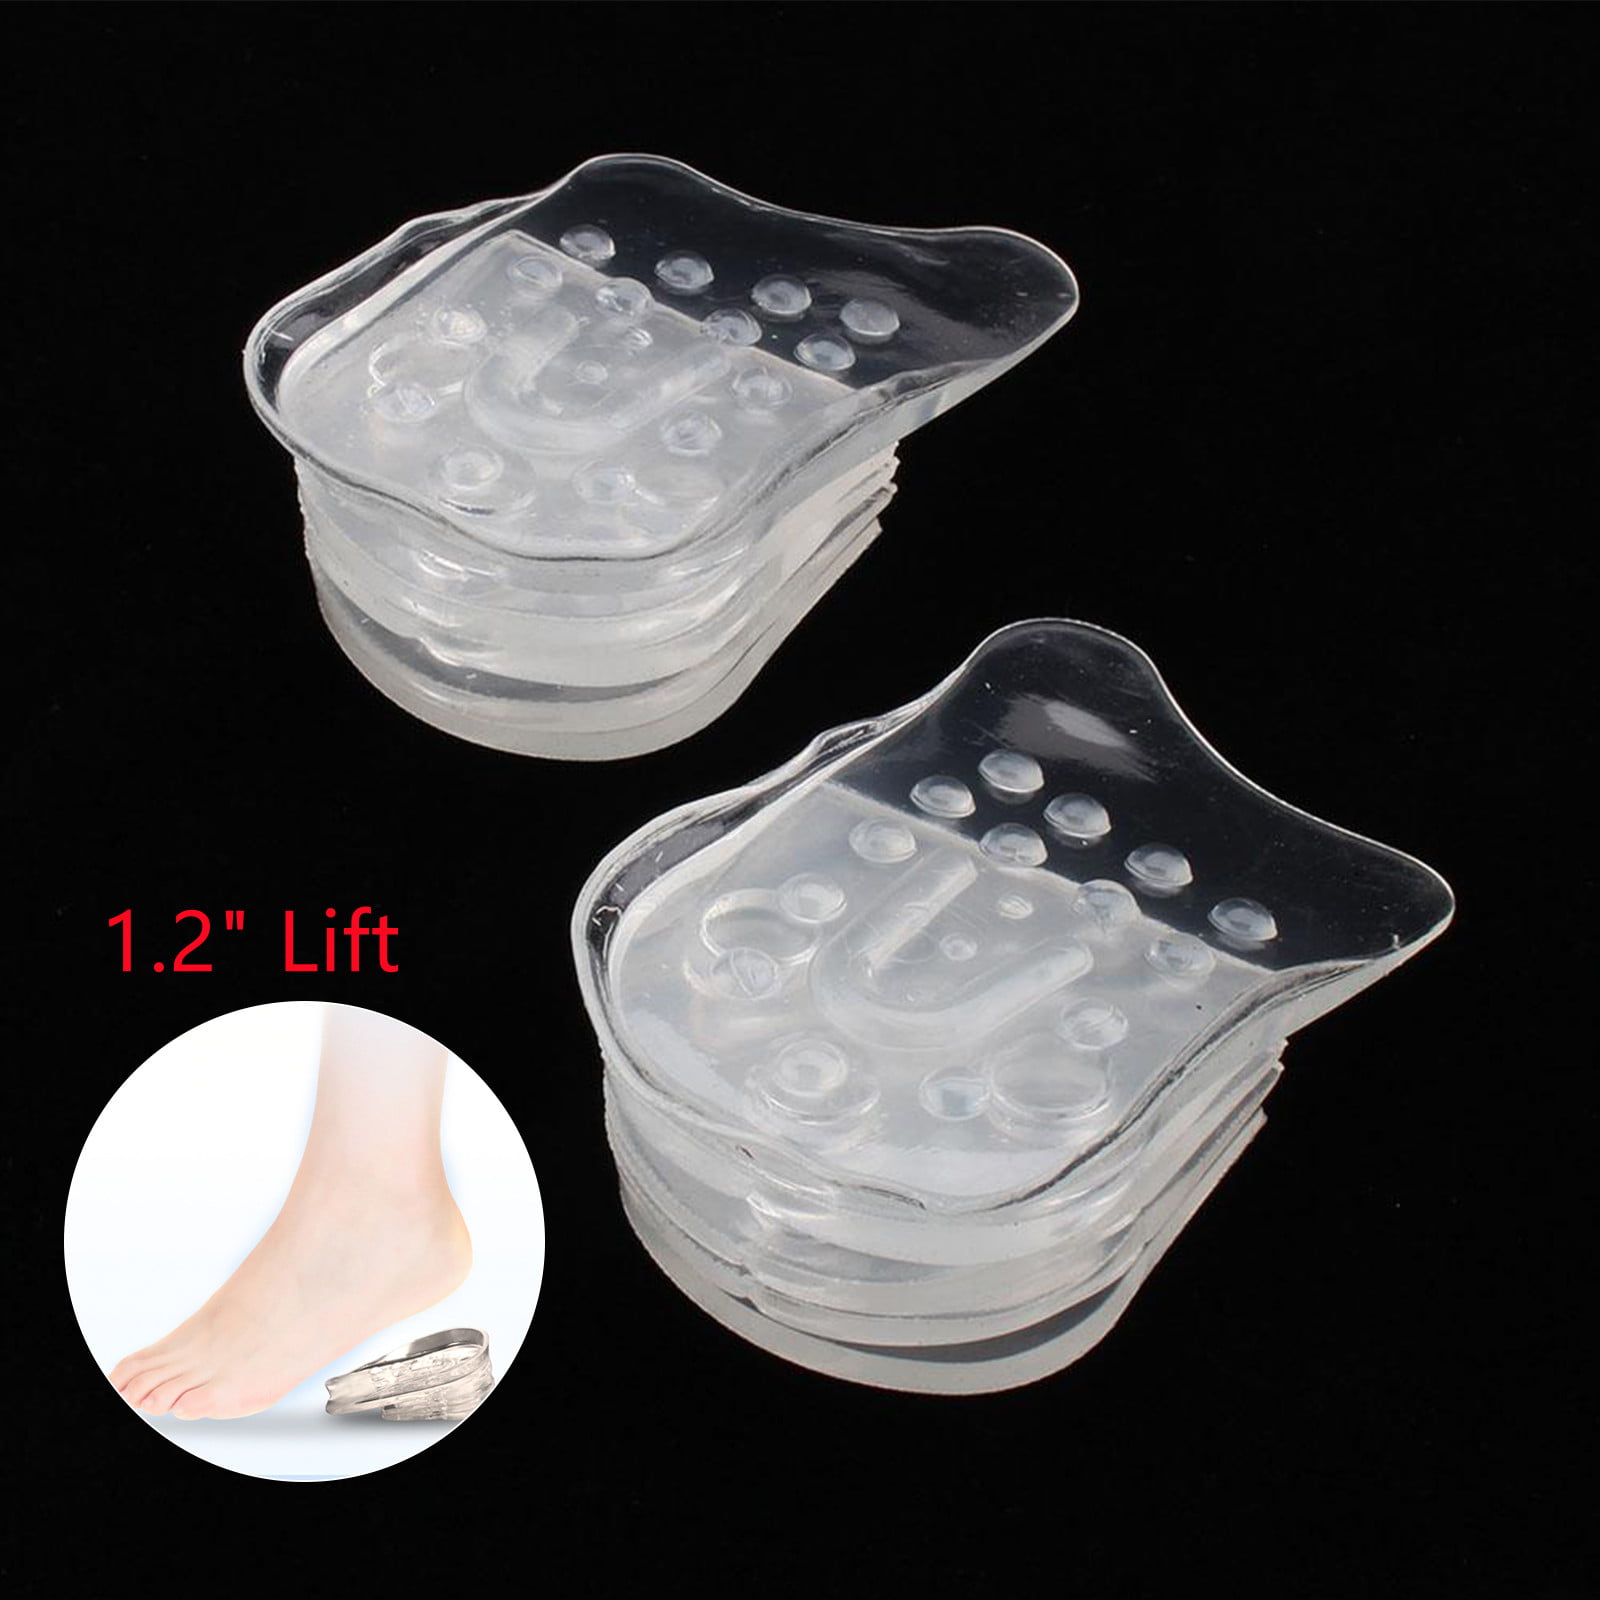 Massage Silicone Crystal Foot Insoles for High-heeled Shoes As Seen On TV 